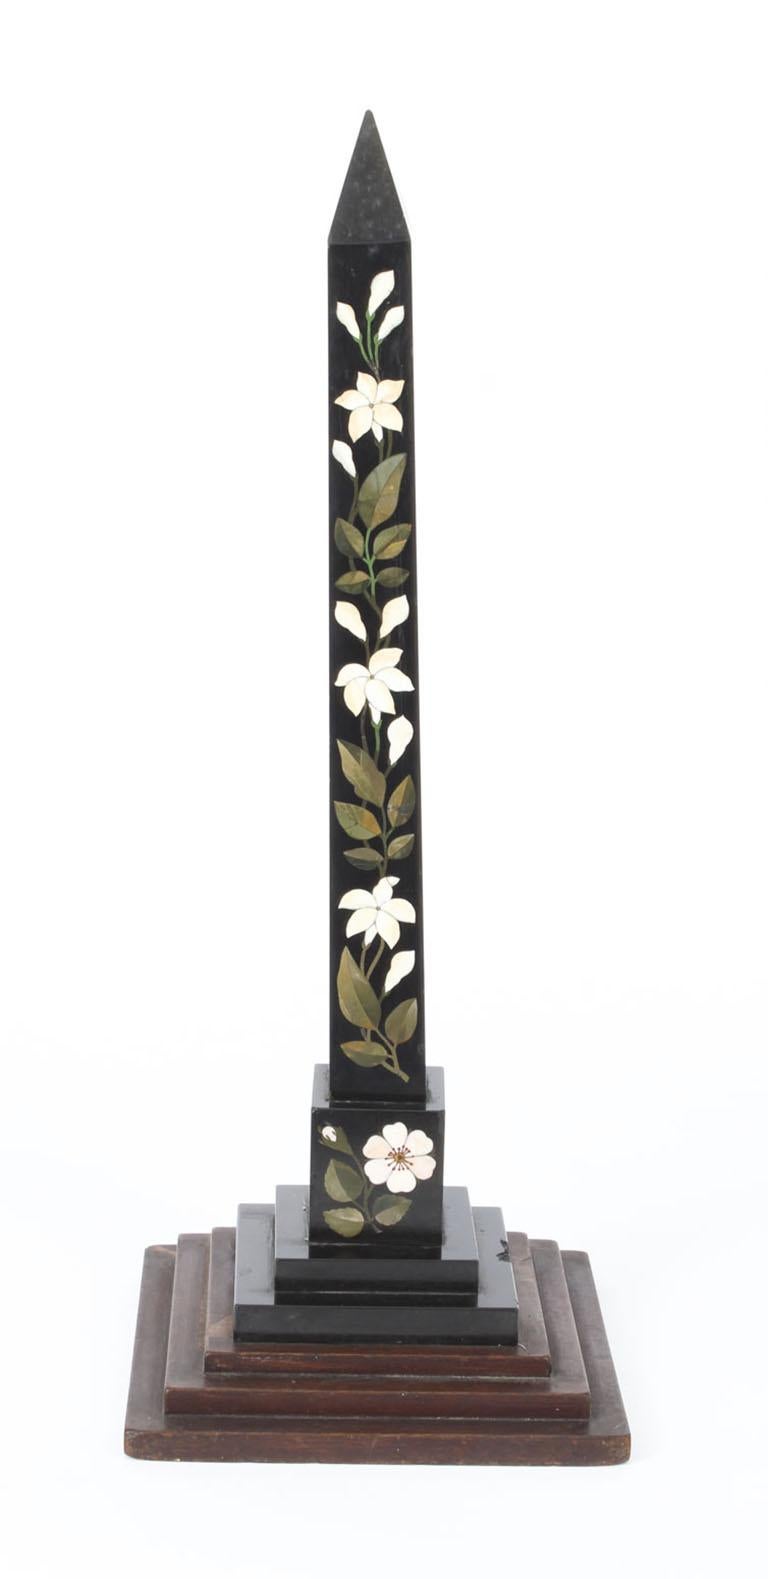 This is a wonderful Derbyshire Ashford pietra dura obelisk, inlaid with lillies, circa 1880 in date.

The obelisk is beautifully inlaid with a Pietra Dura of white flowers and malachite leaves.
This delightful object will look beautiful on